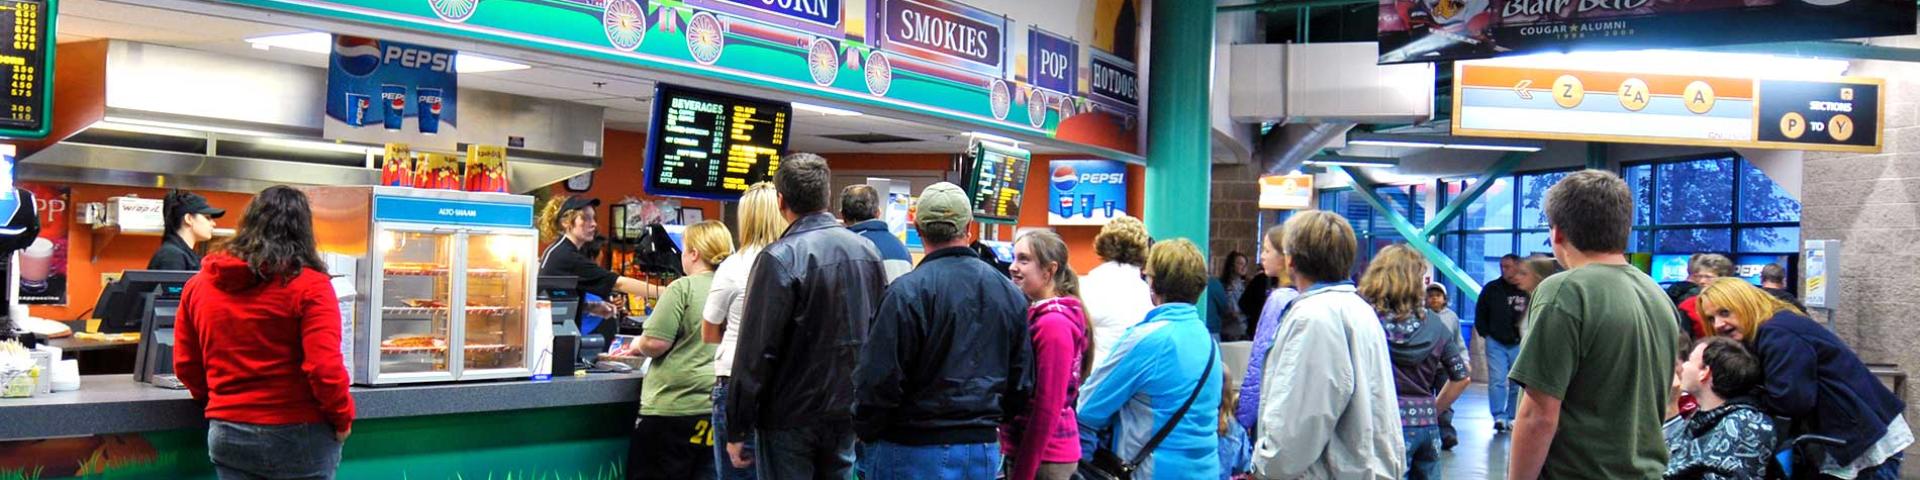 About 10 people in a lineup to purchase food at a concession. Concession features photos of foods available, including burgers, fries, and coffee.